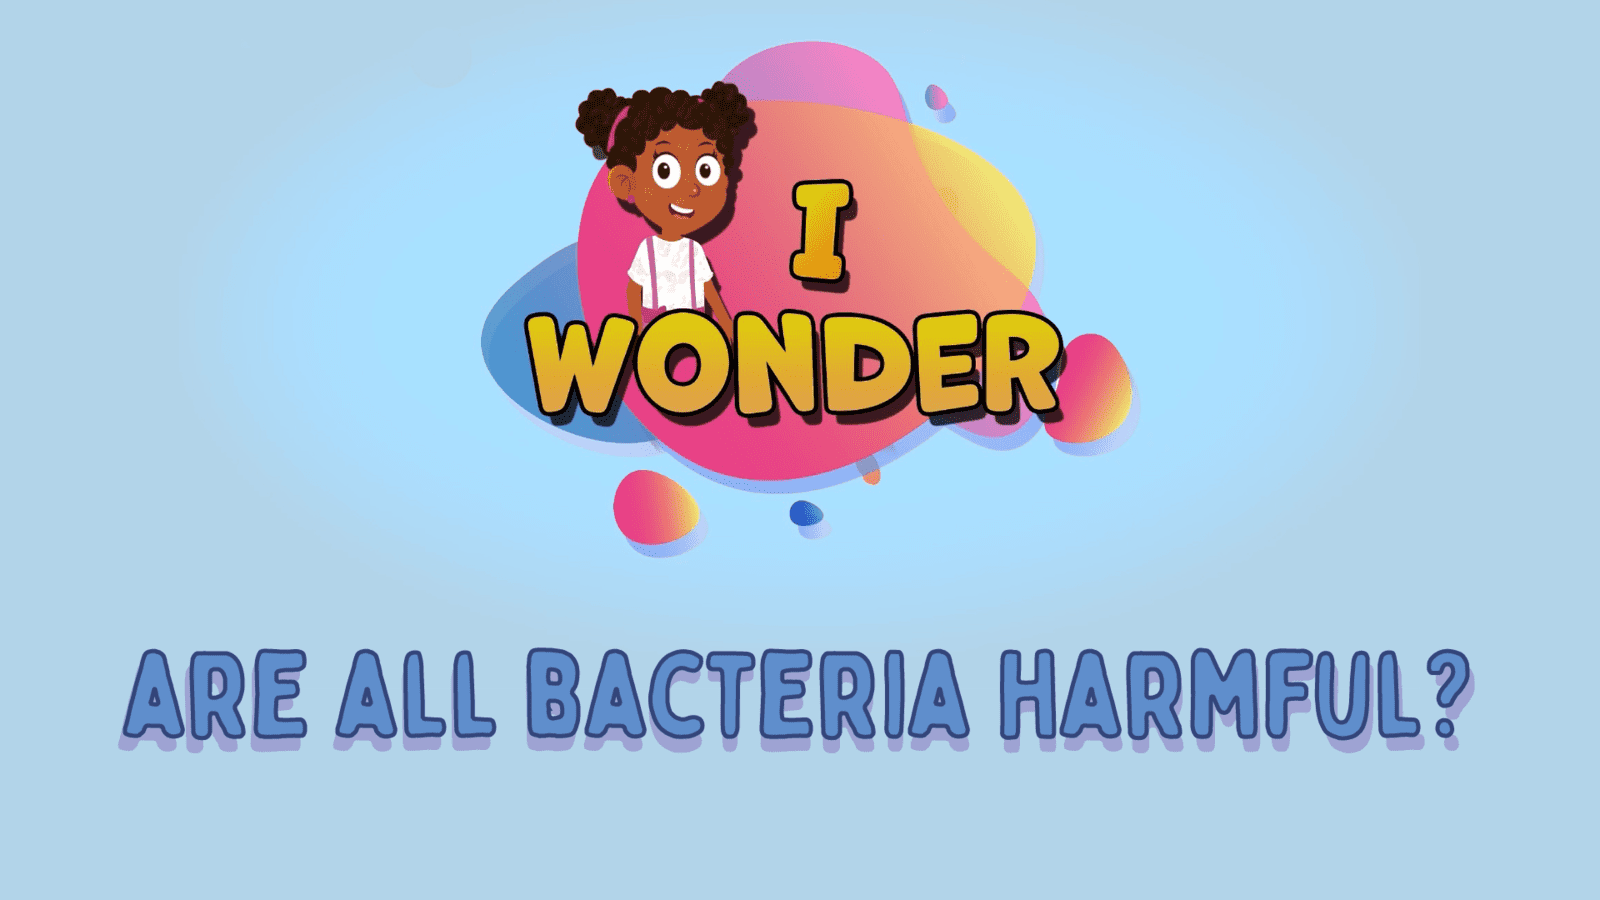 Are All Bacteria Harmful?